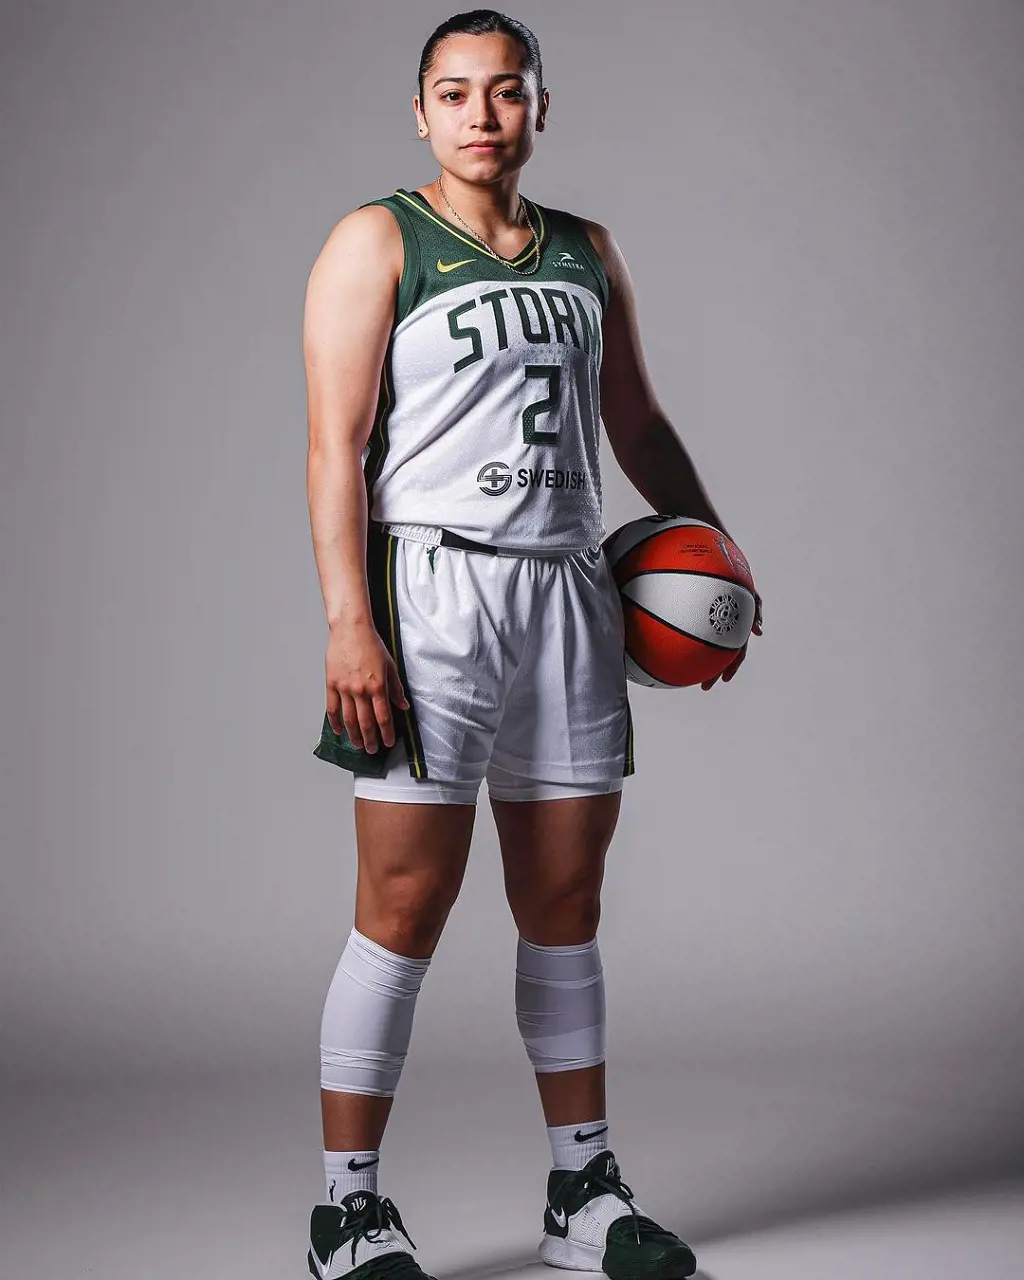 Perez is eligible to play for the WNBA team Seattle Storm after signing a hard clause contract.